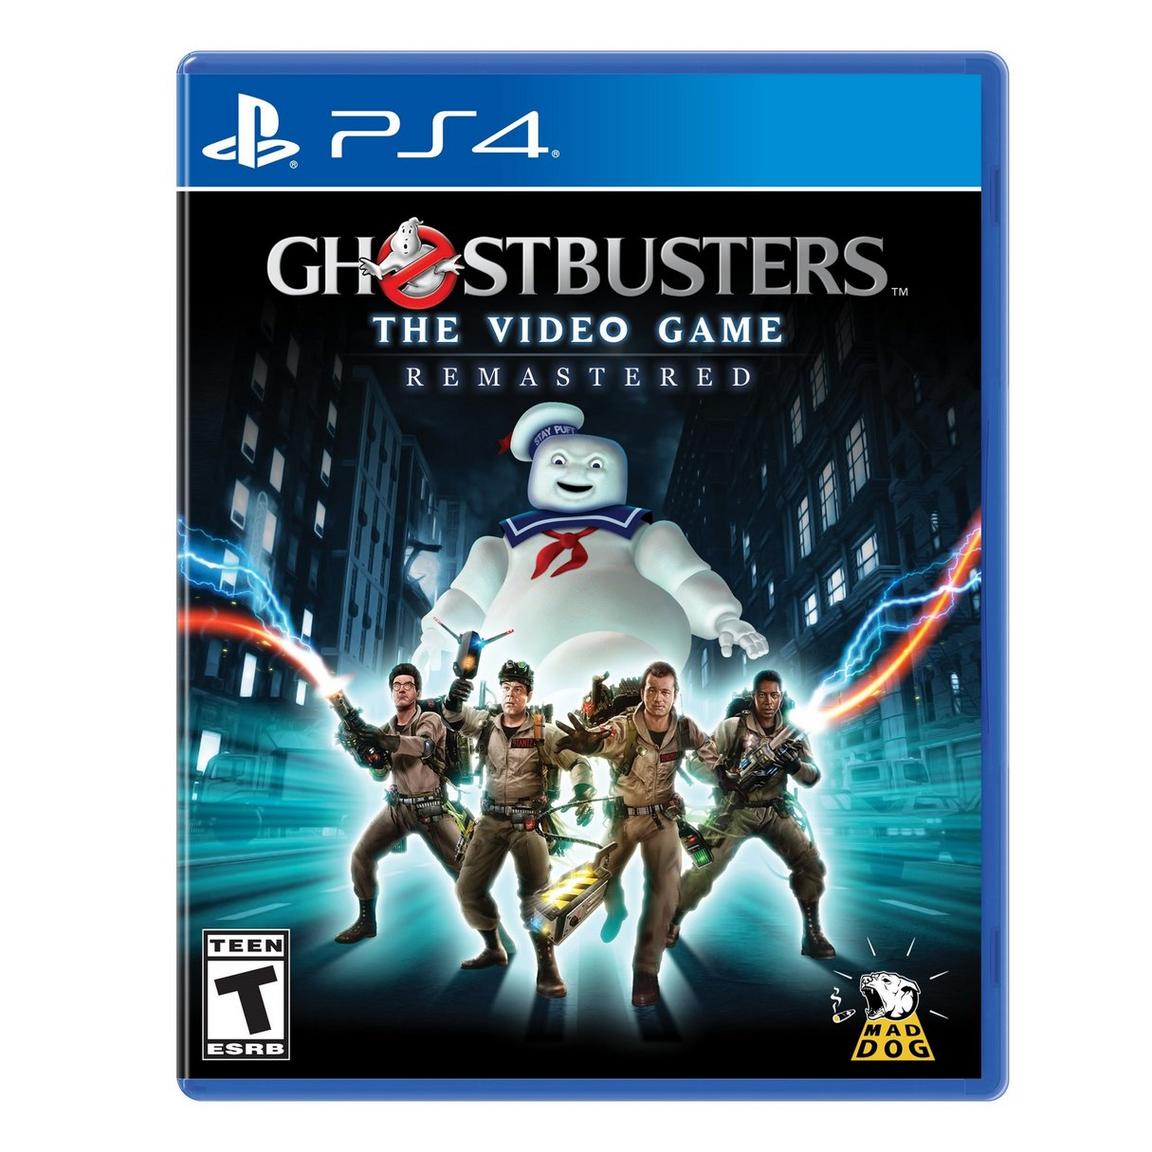 Ghostbusters: The Video Game Remastered - PlayStation 4 GameStop Exclusive, Pre-Owned